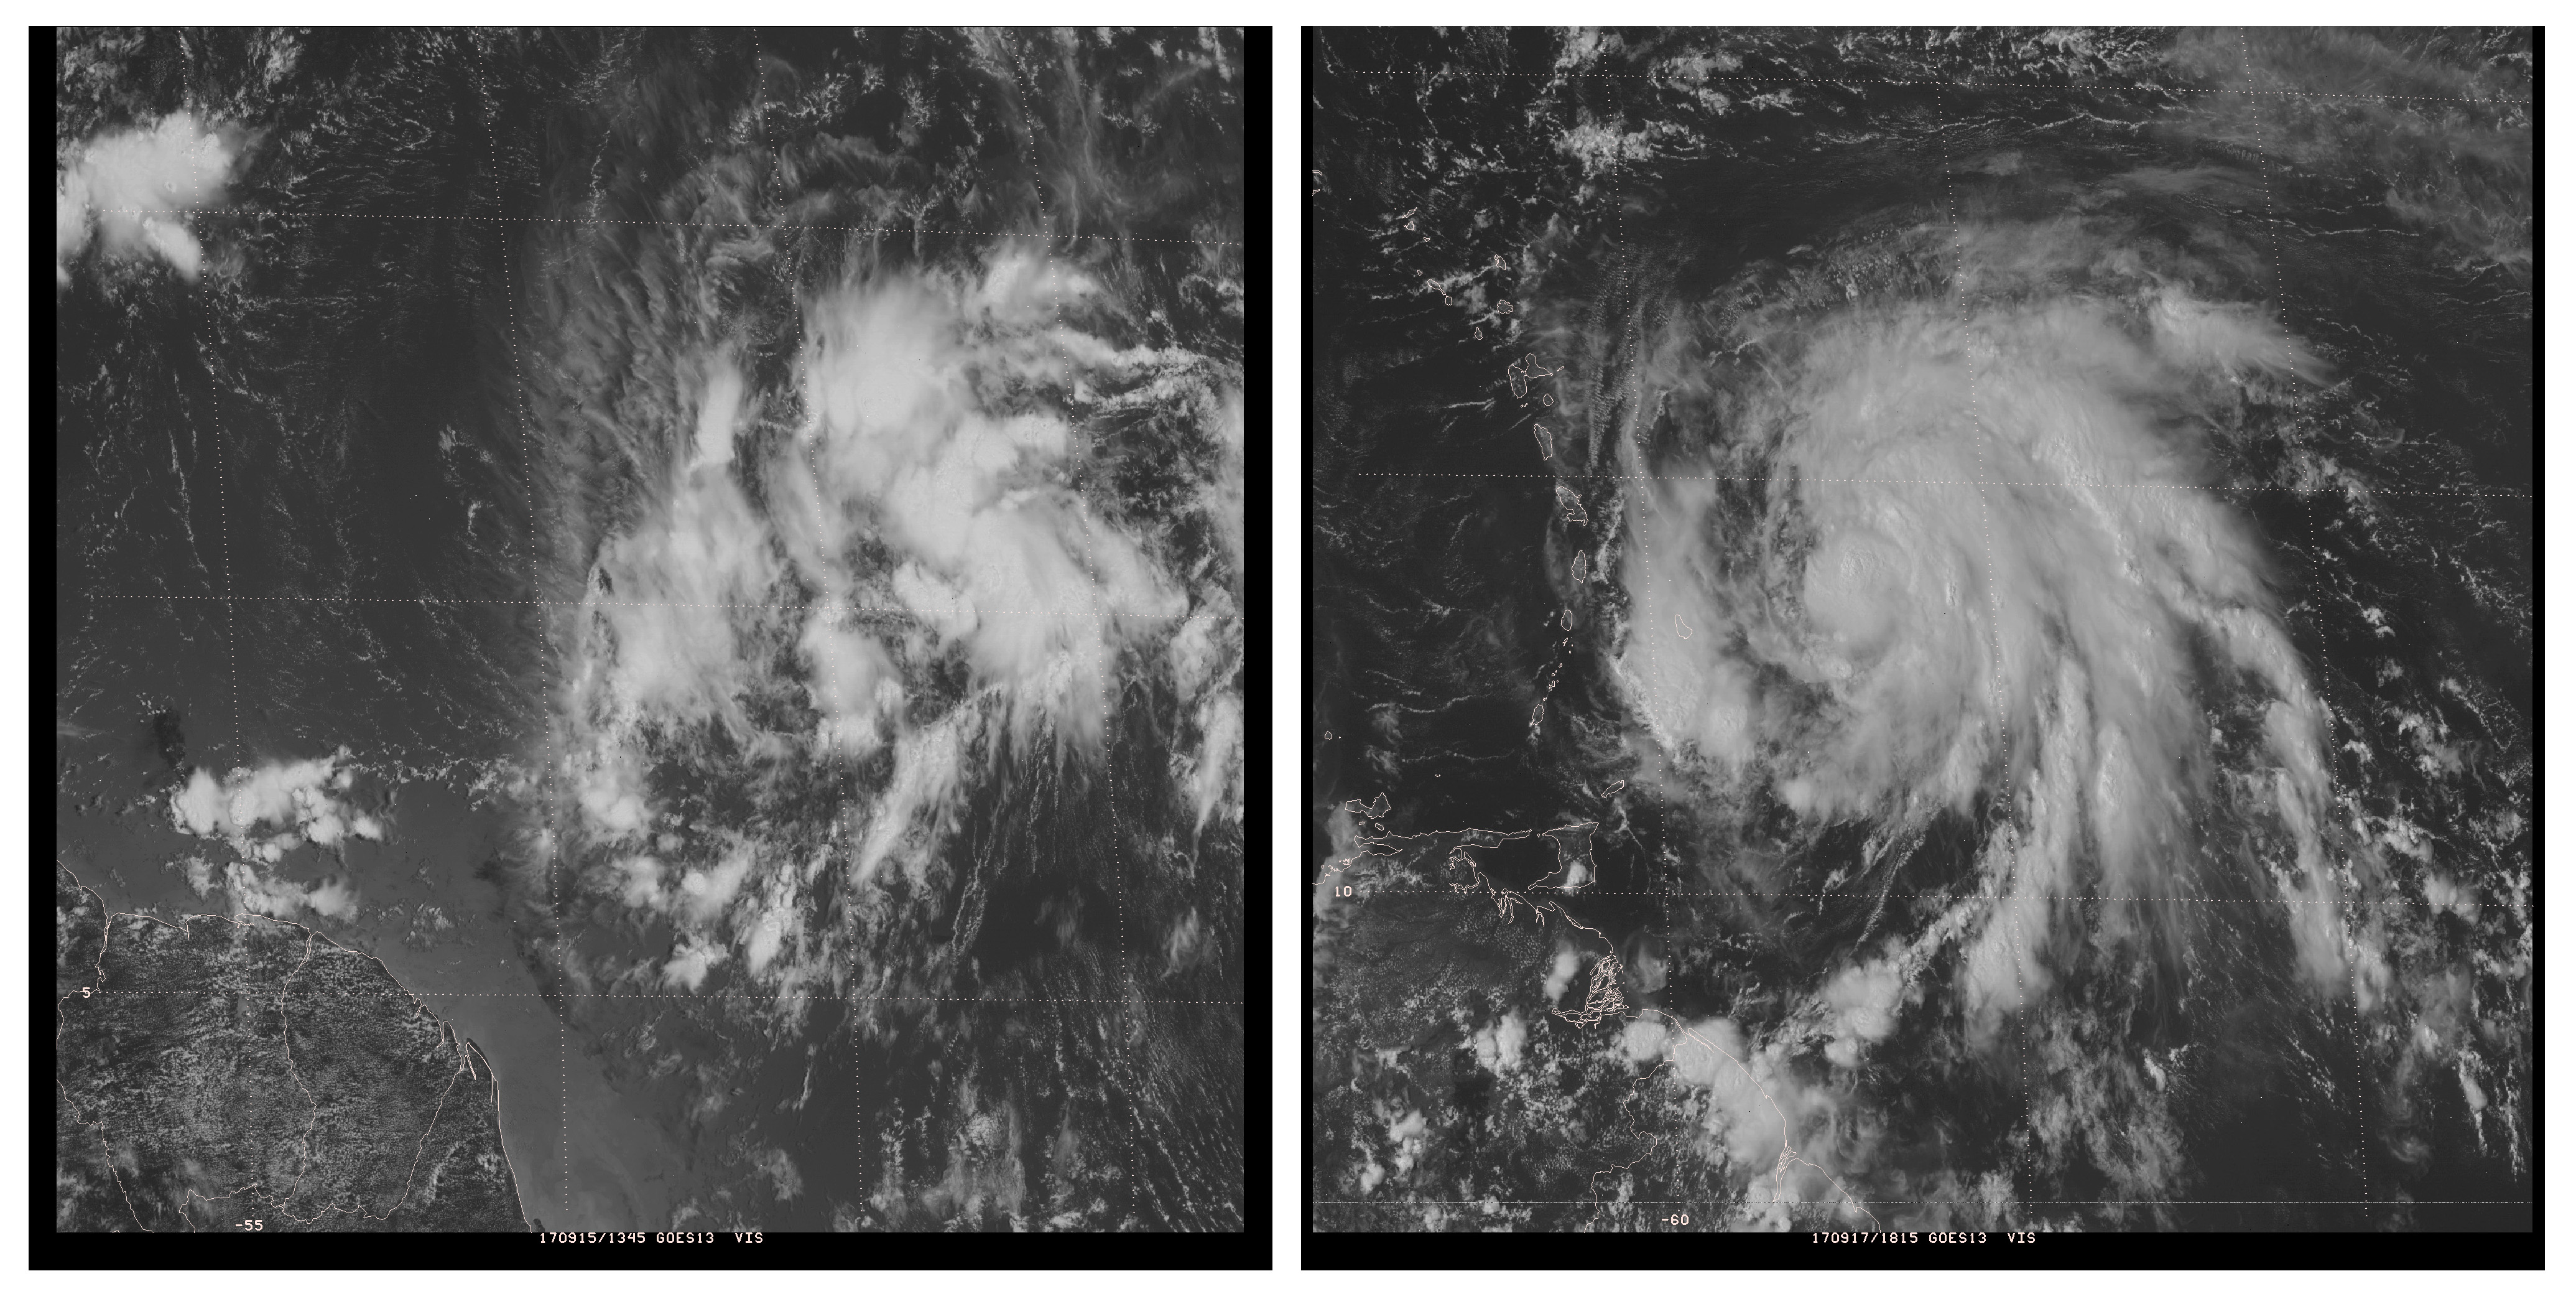 Two satellite images side by side. In the image on the left, there is no clear thunderstorm banding. On the right, the disturbance has escalated to a tropical storm and it has become "organized" with bands wrapping around the center.